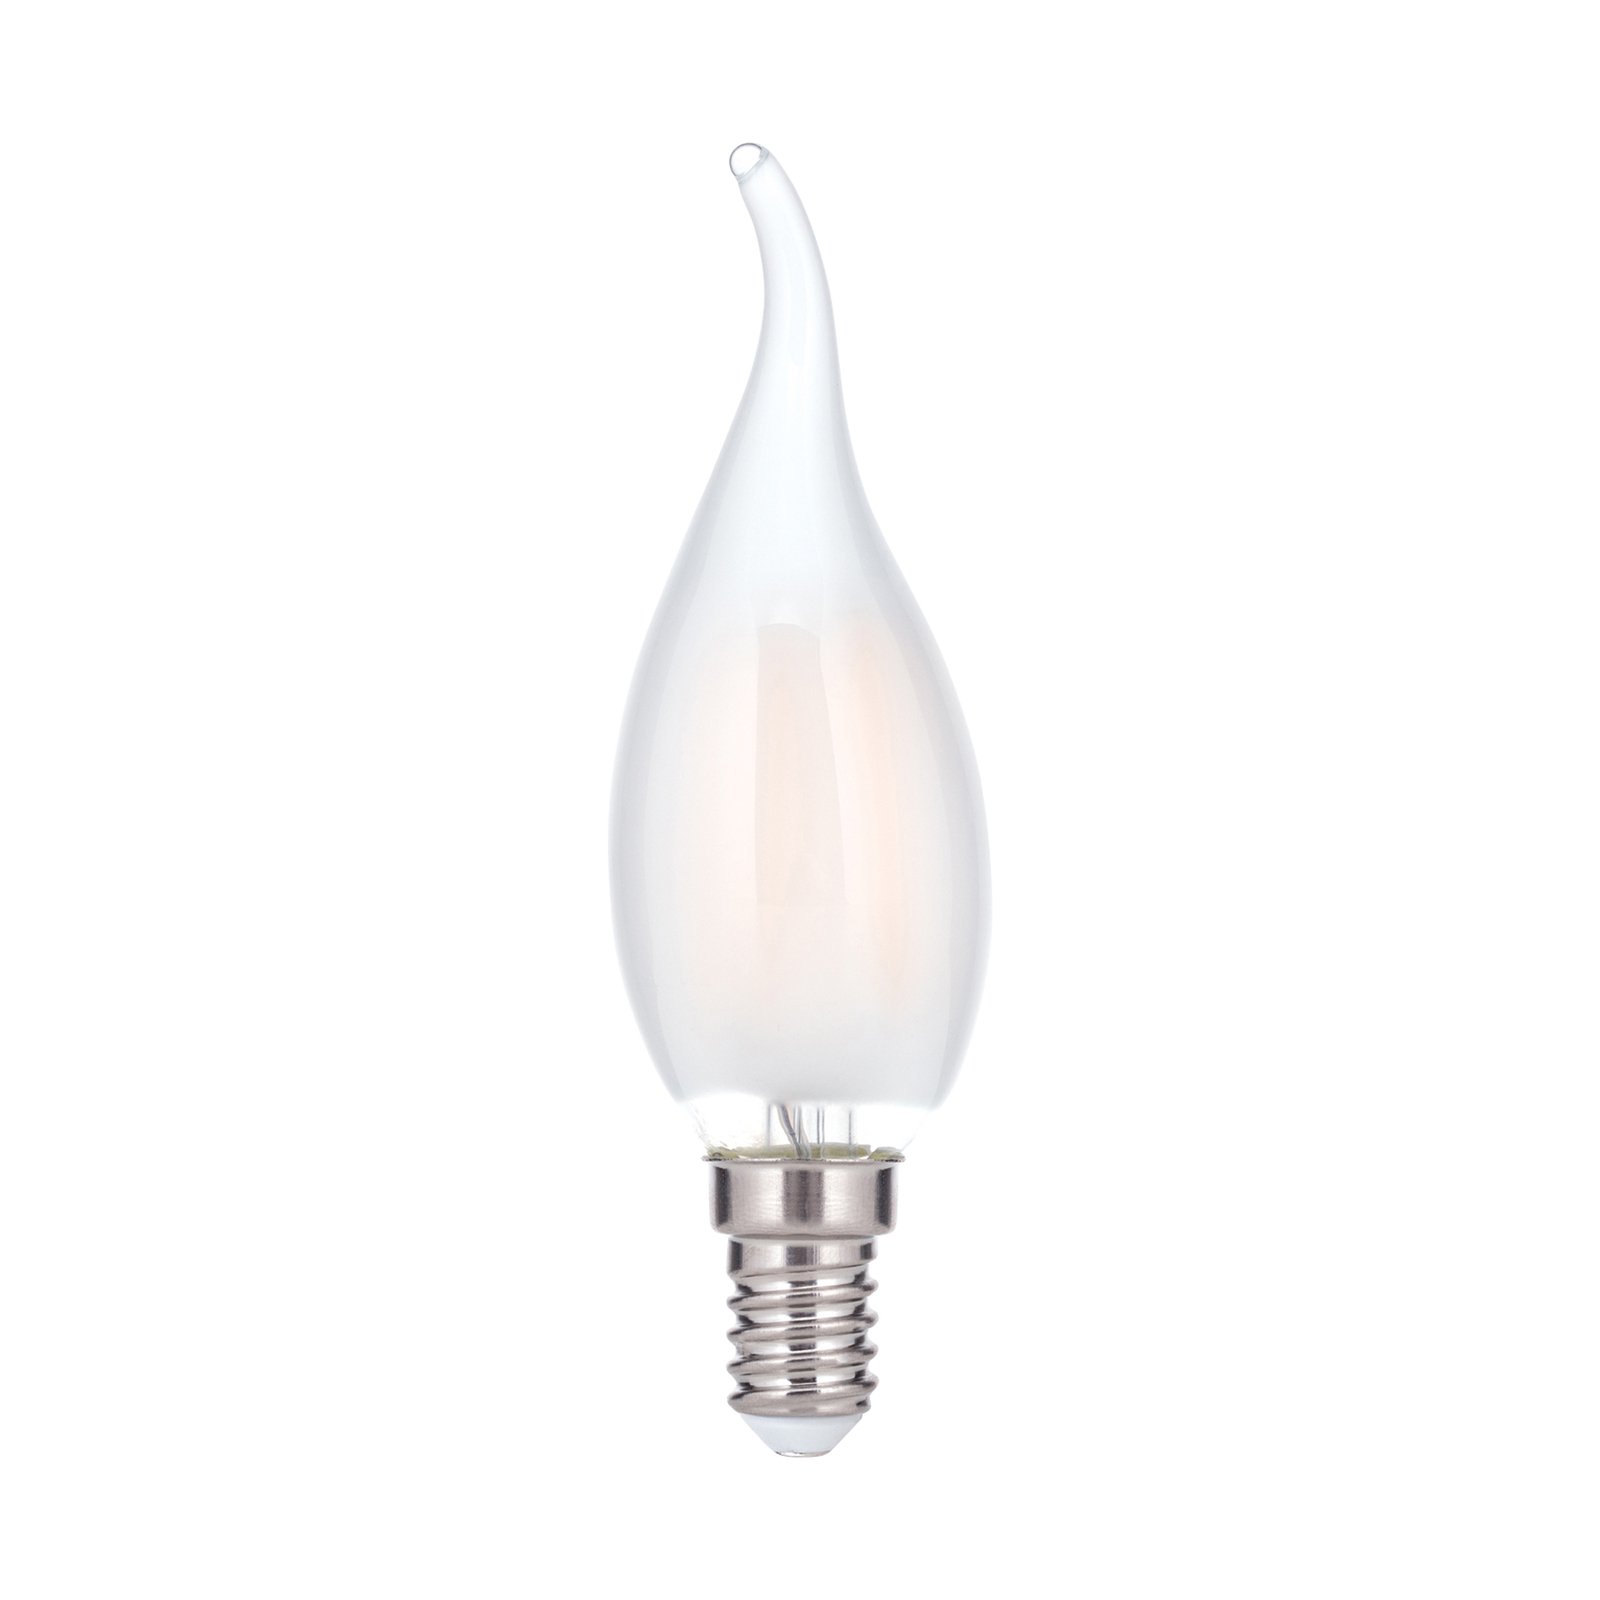 Bougie LED E14 4,5 W flamme 2 700 K mate dimmable